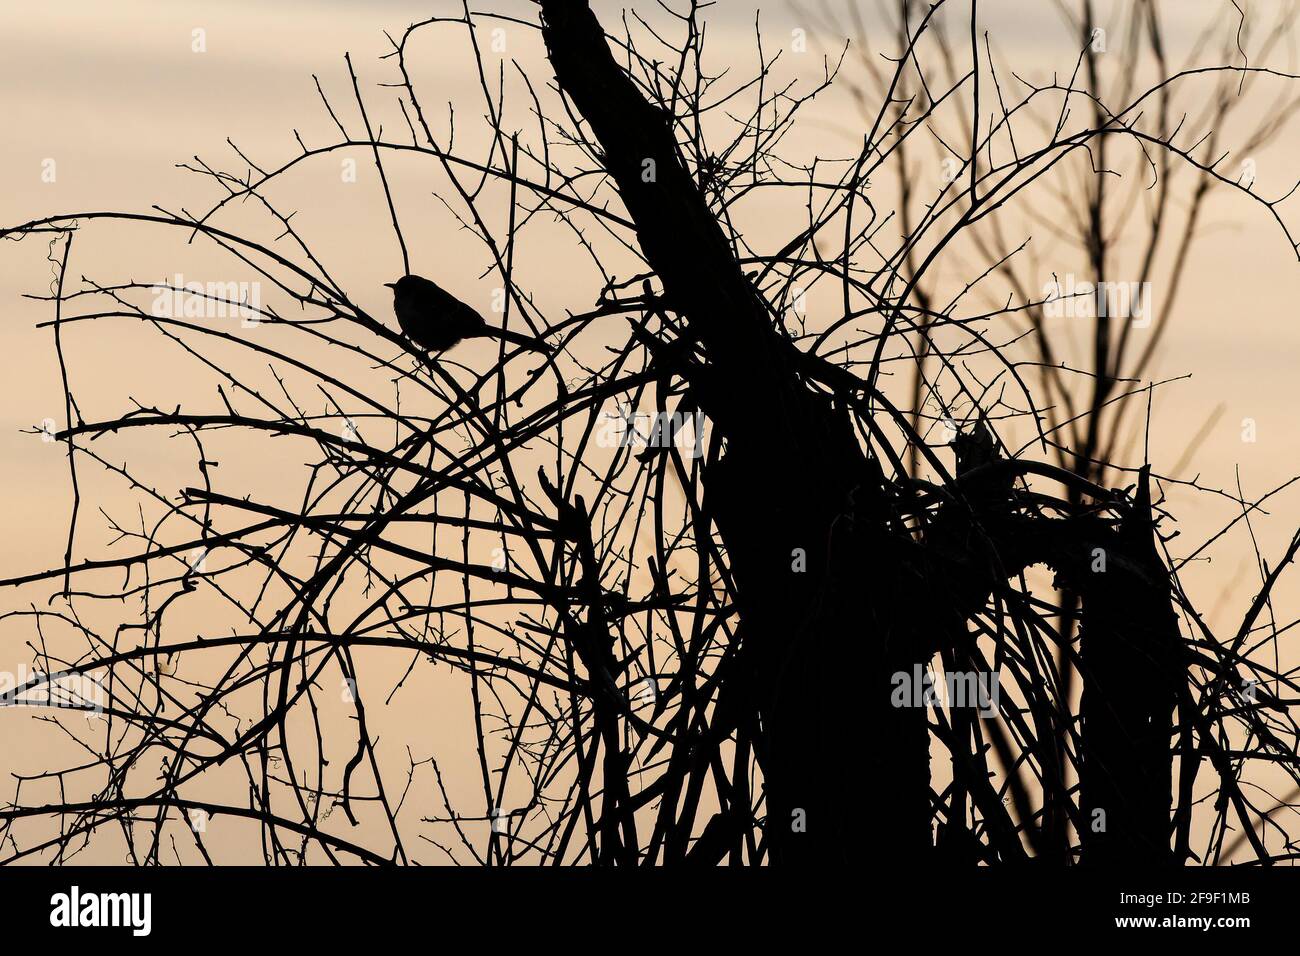 Songbird silhouette in tangled woody area Stock Photo